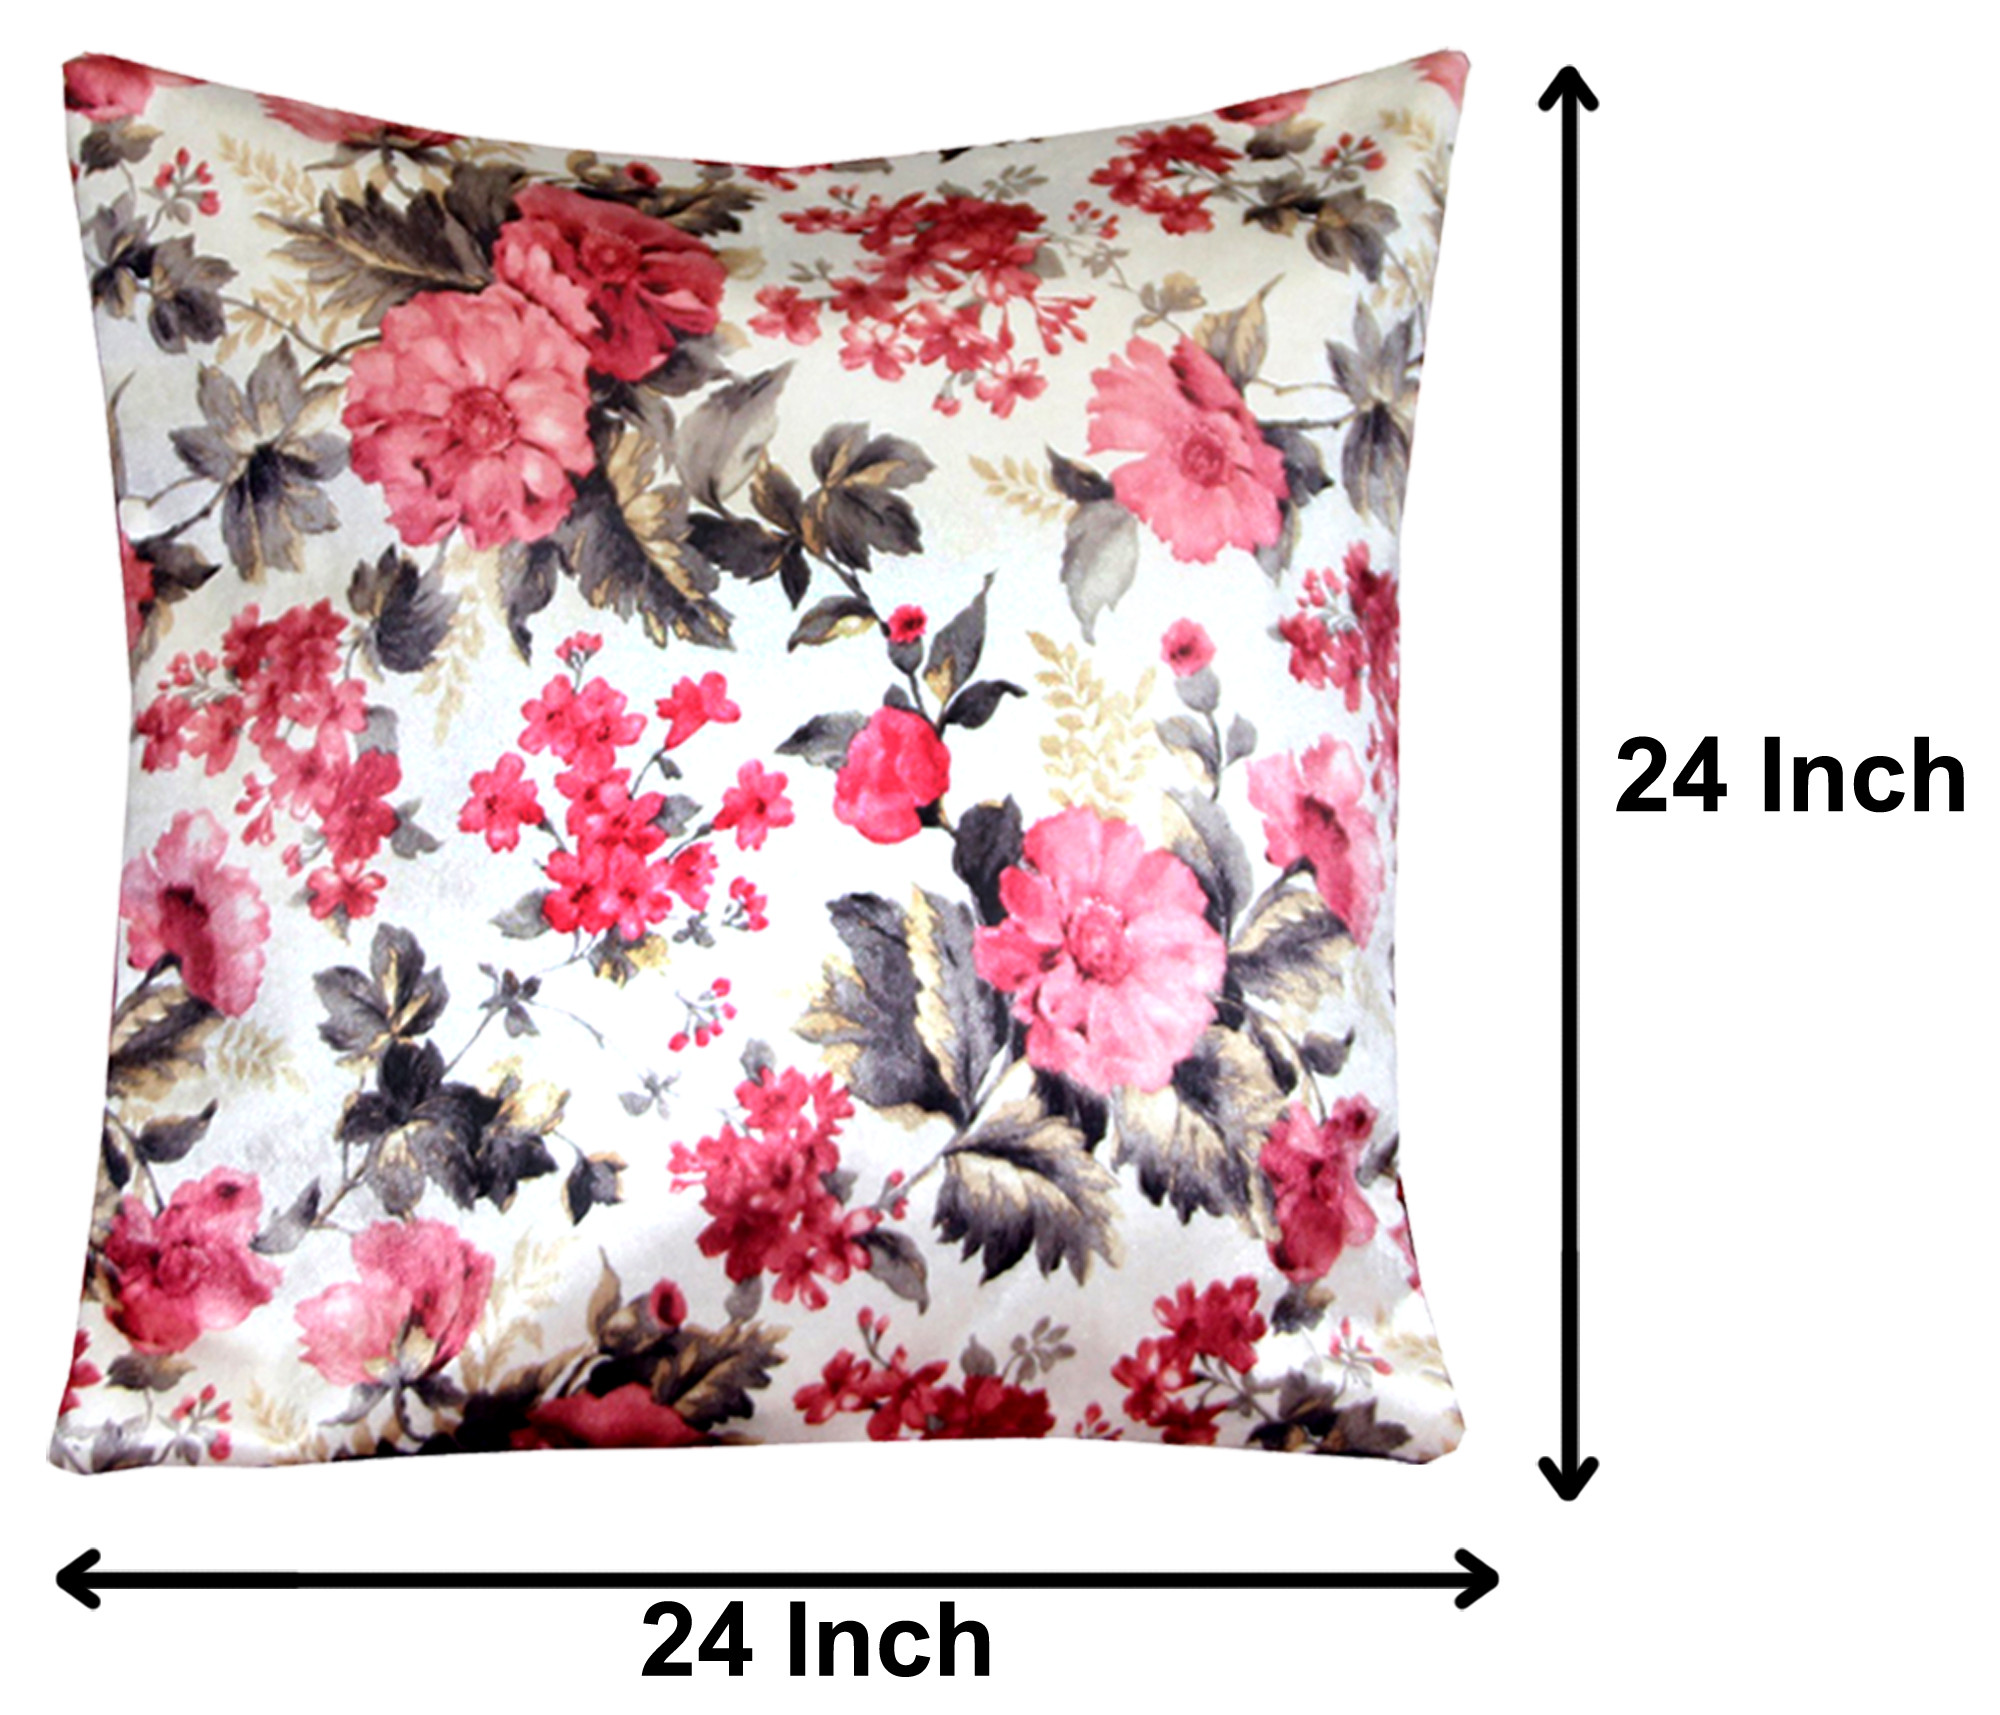 Kuber Industries Flower Design Velvet Soft Decorative Square Throw Pillow Cover Cushion Covers Pillow case, Home Decor Decorations for Sofa Couch Bed Chair 24x24 Inch (Cream)